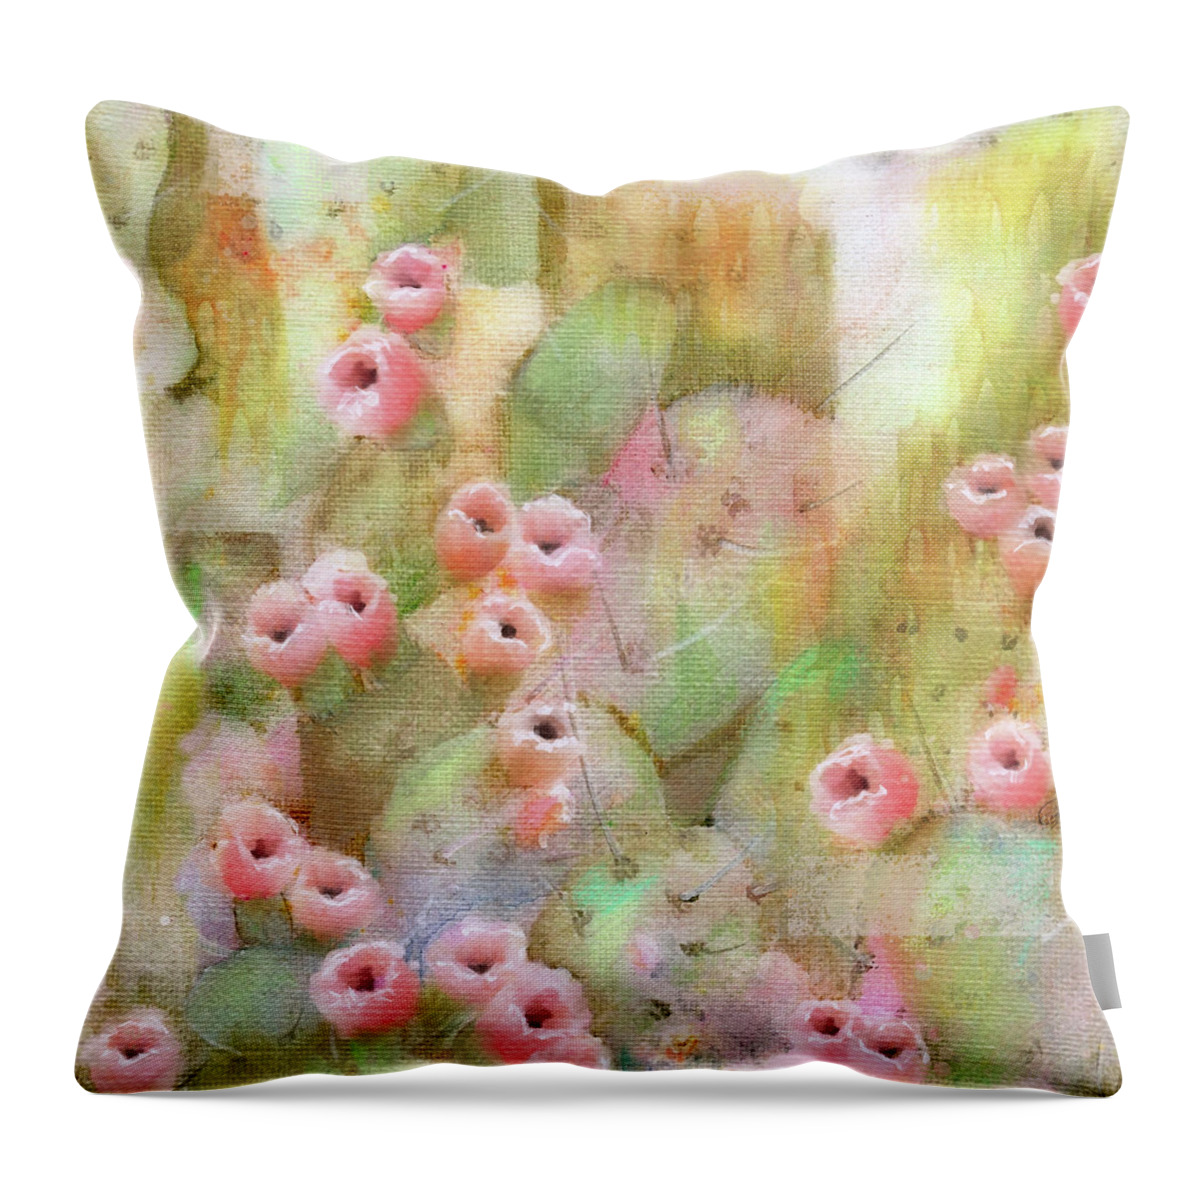 Cactus Throw Pillow featuring the mixed media Cactus Rose by Sand And Chi